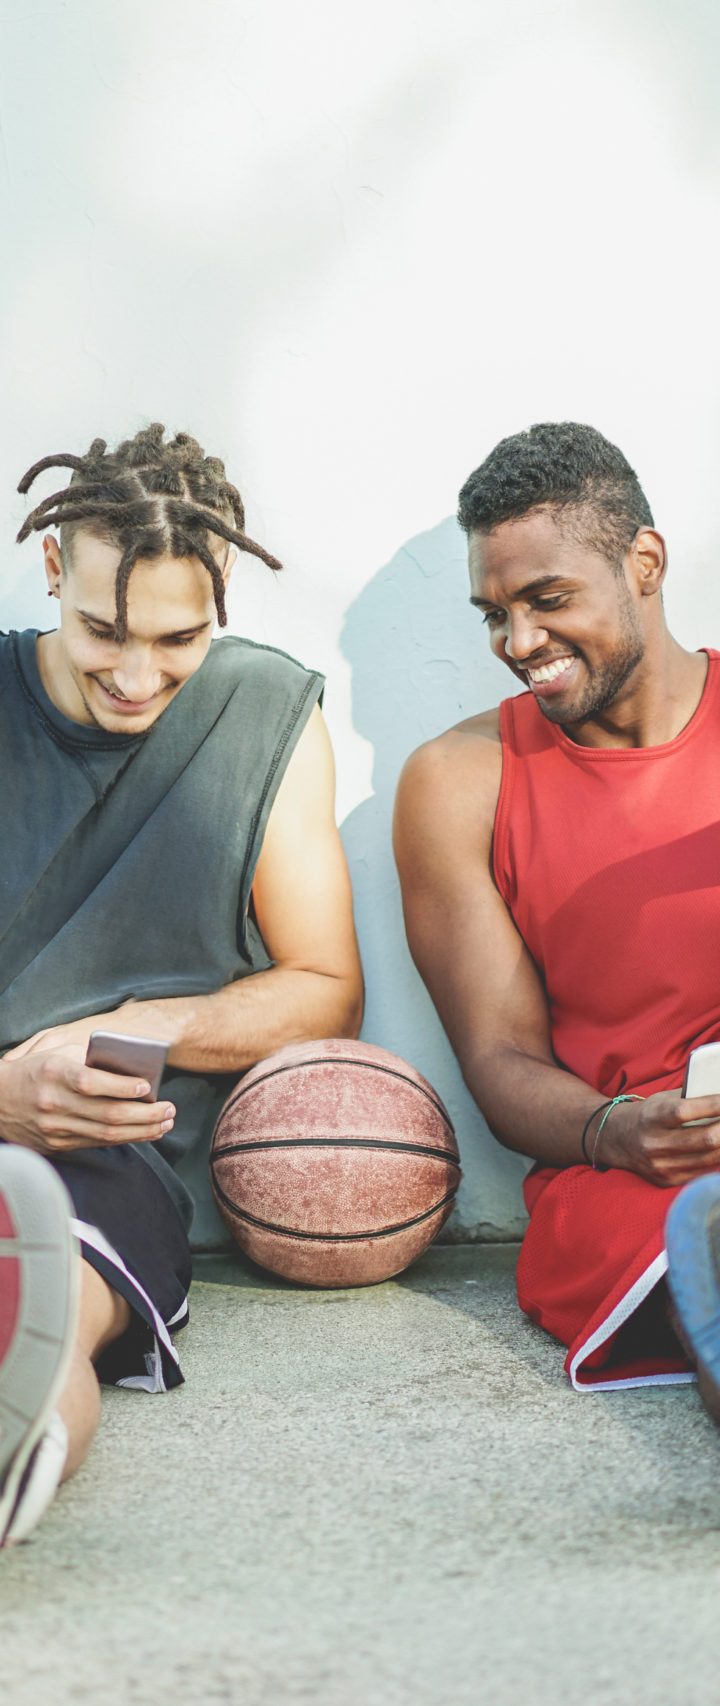 Young cheerful basket ball players having fun with smart phone outdoor - Best sport friends sharing free time with new trends technology - Technology and sporty lifestyle concept - Warm retro filter